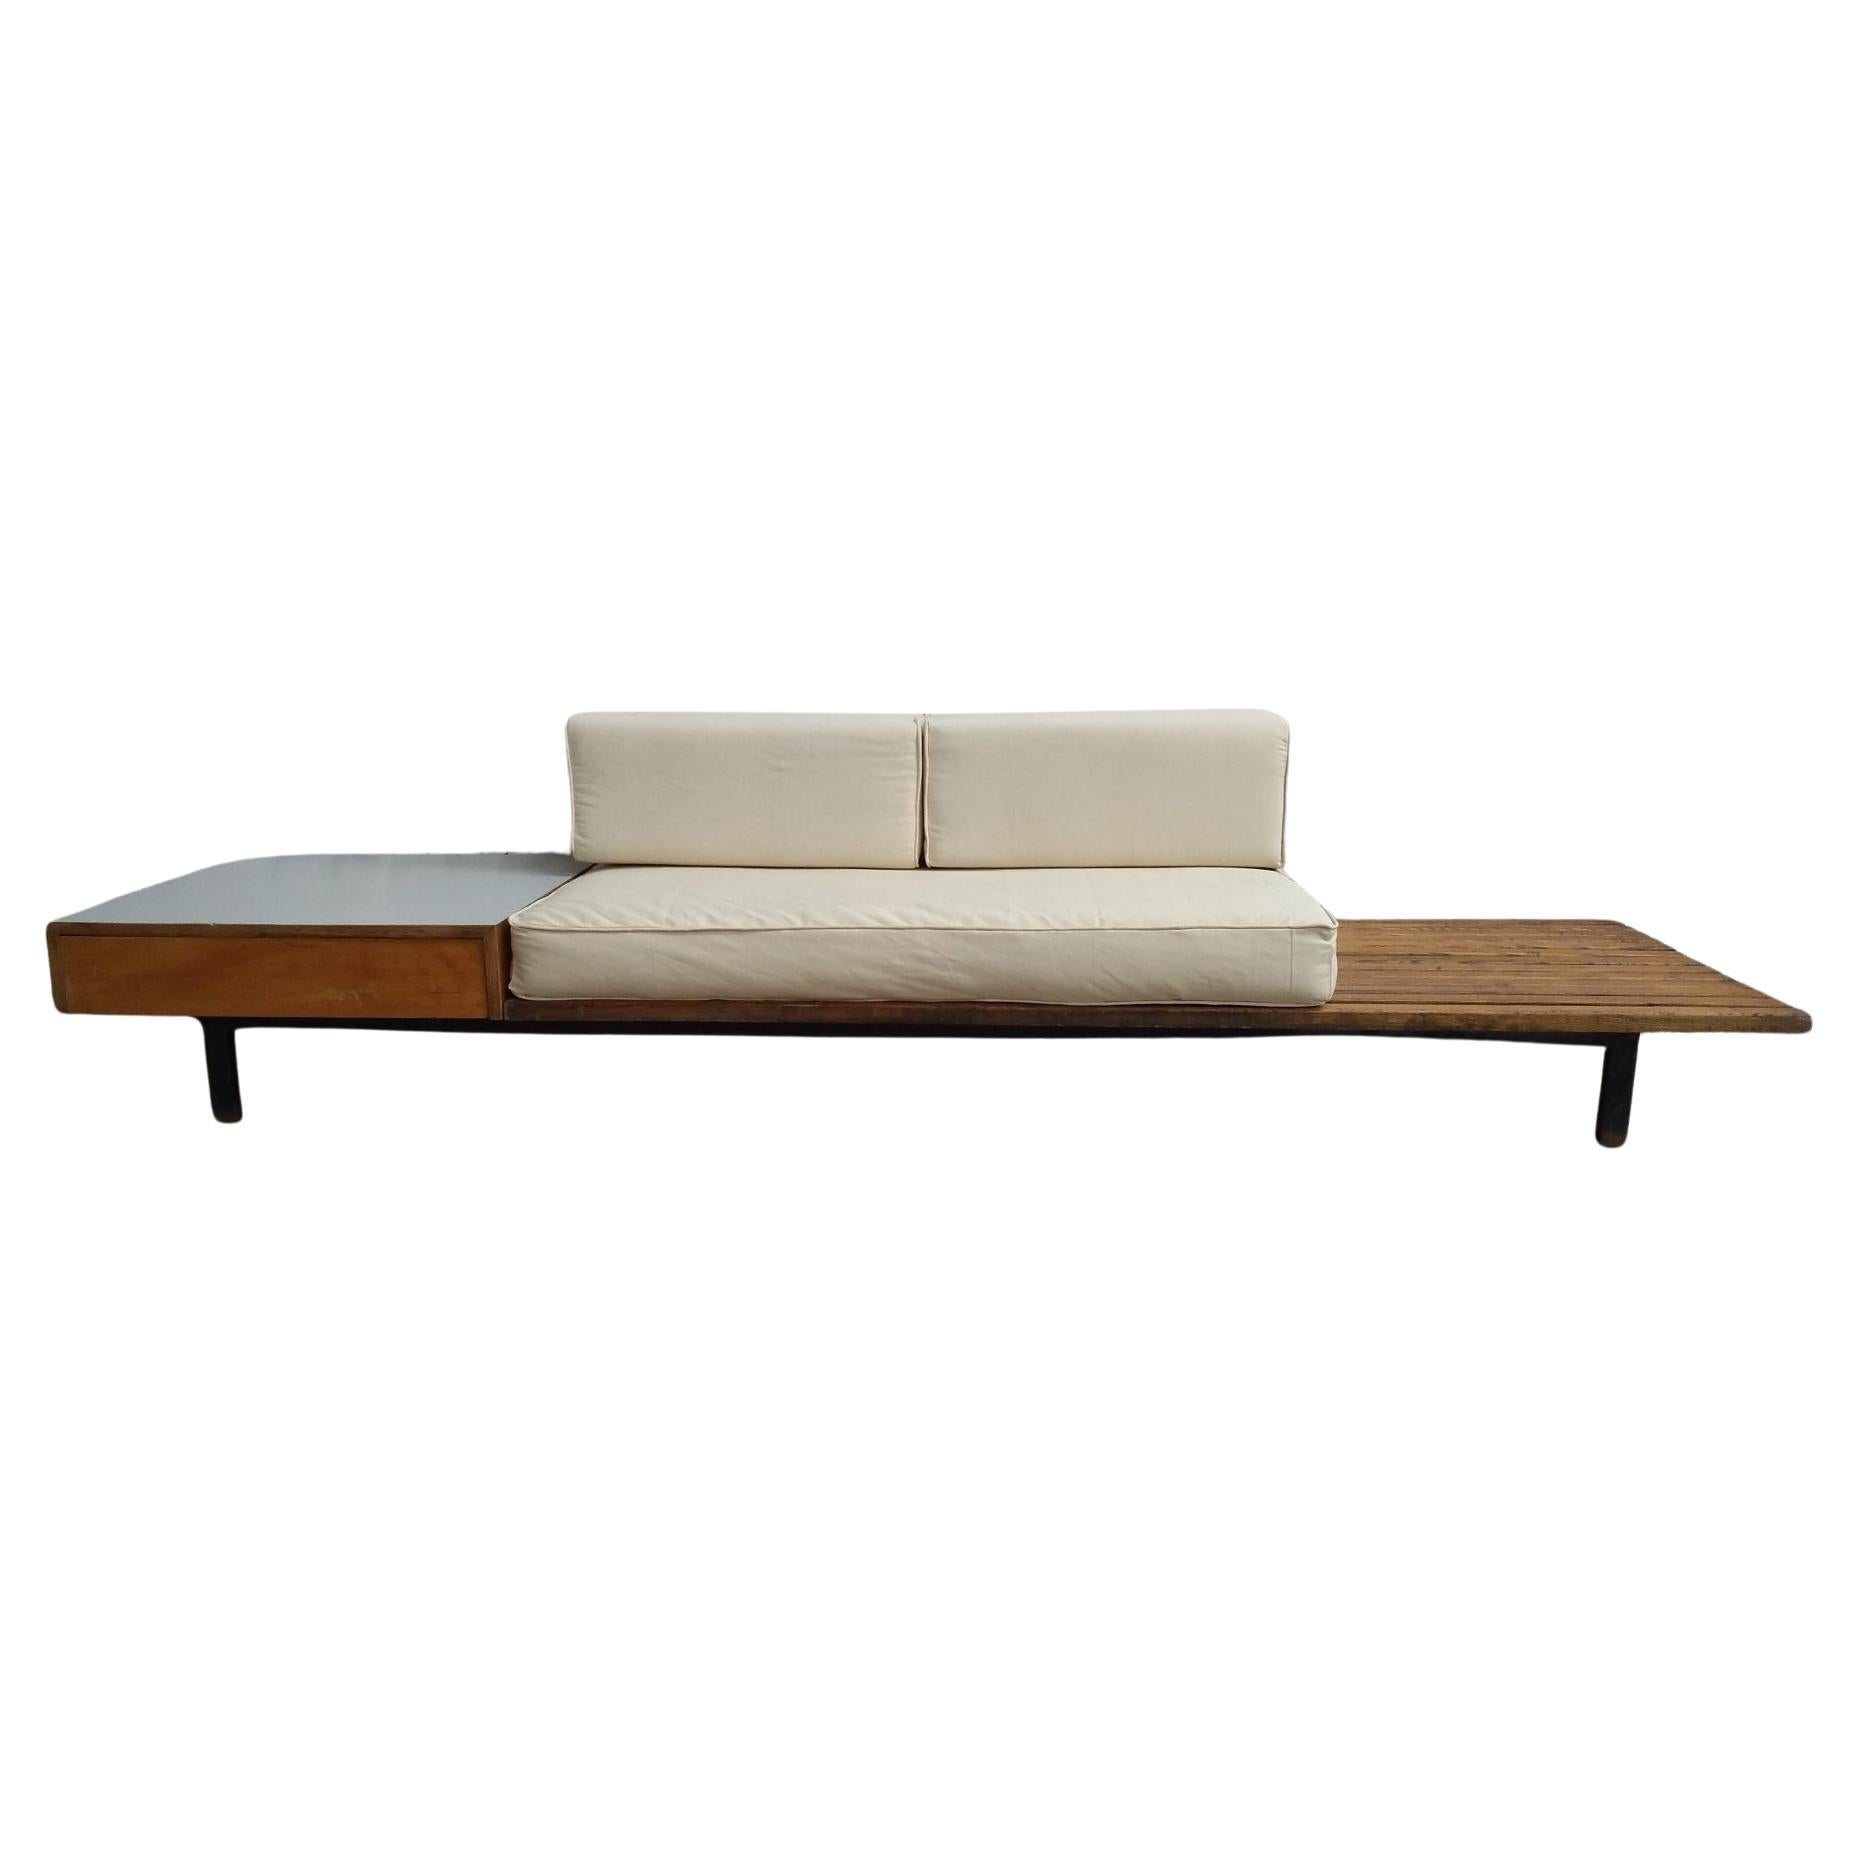 Charlotte Perriand Cansado bench daybed Steph Simon France 1959